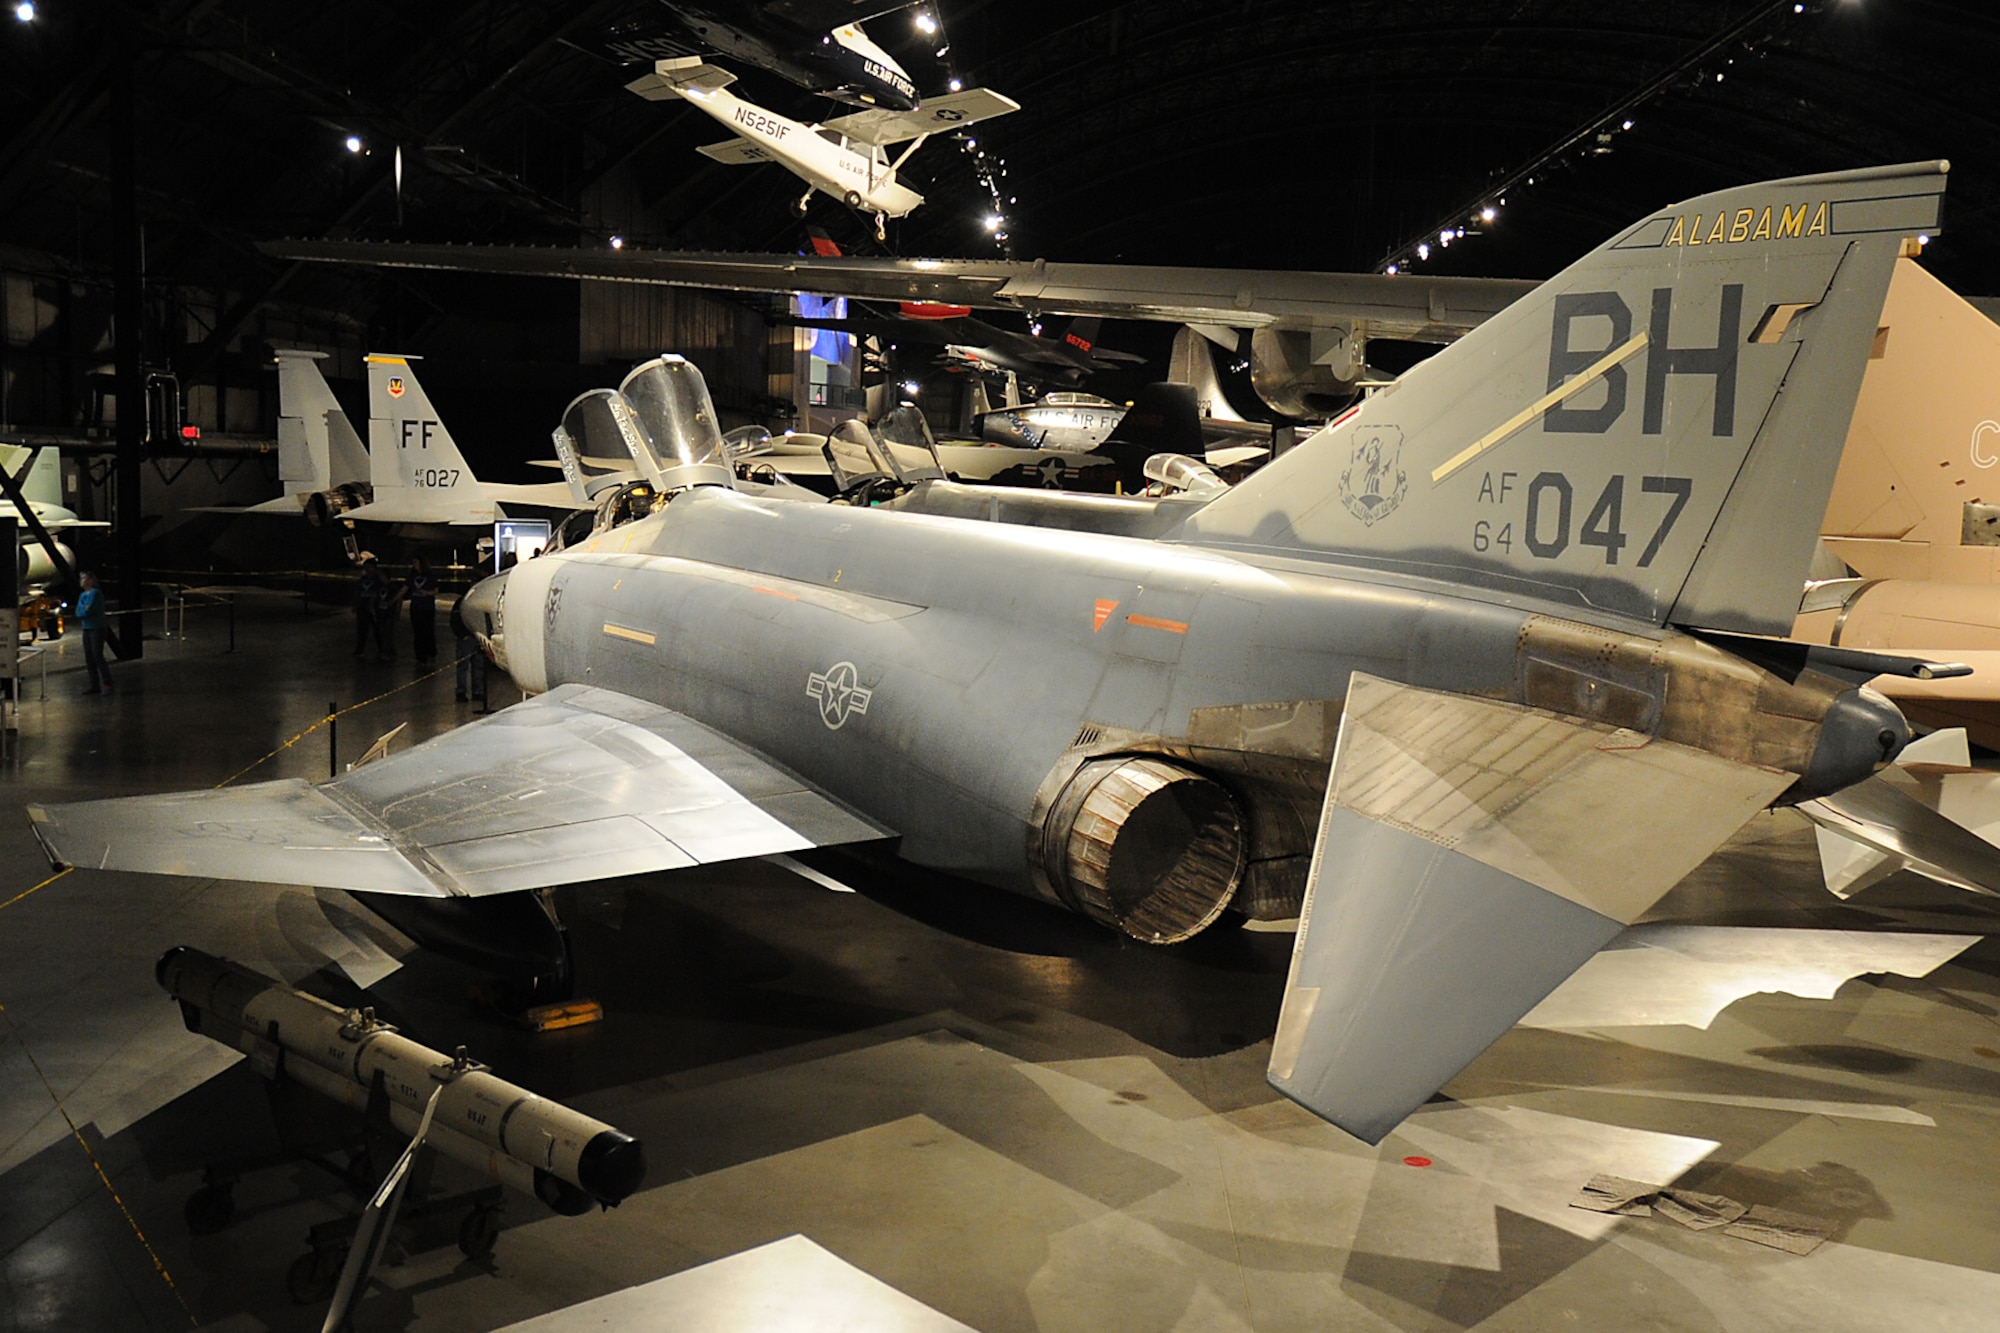 DAYTON, Ohio -- McDonnell Douglas RF-4C Phantom II in the Cold War Gallery at the National Museum of the United States Air Force. (U.S. Air Force photo)
